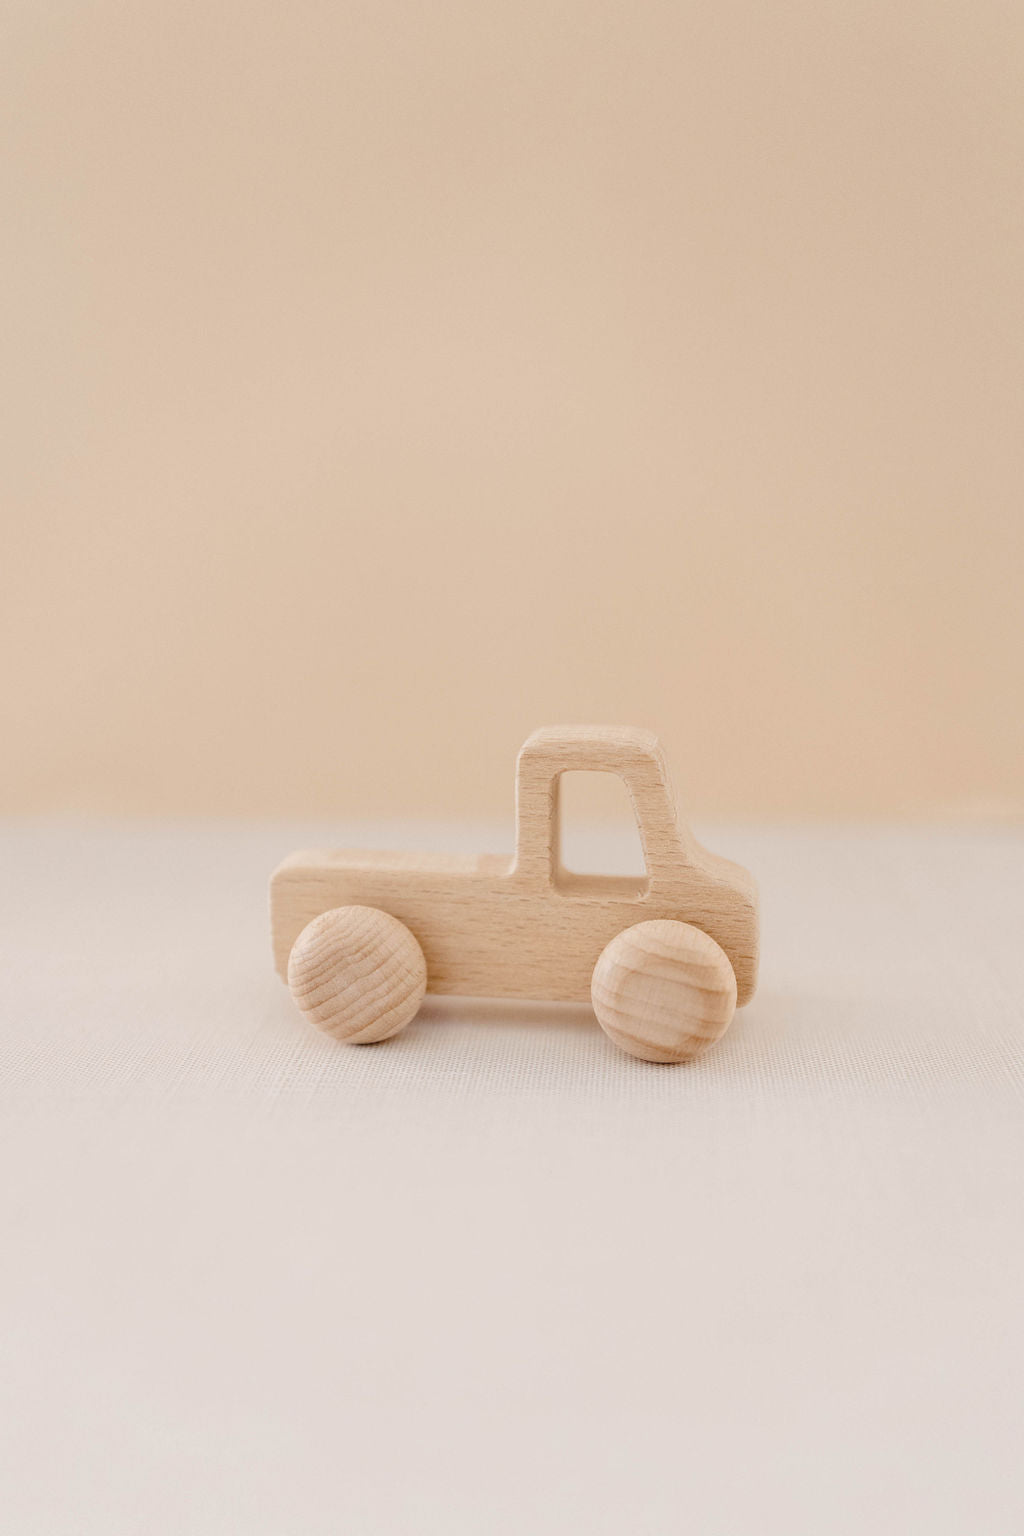 Mini Pick-Up Truck Teether / Travel Toy